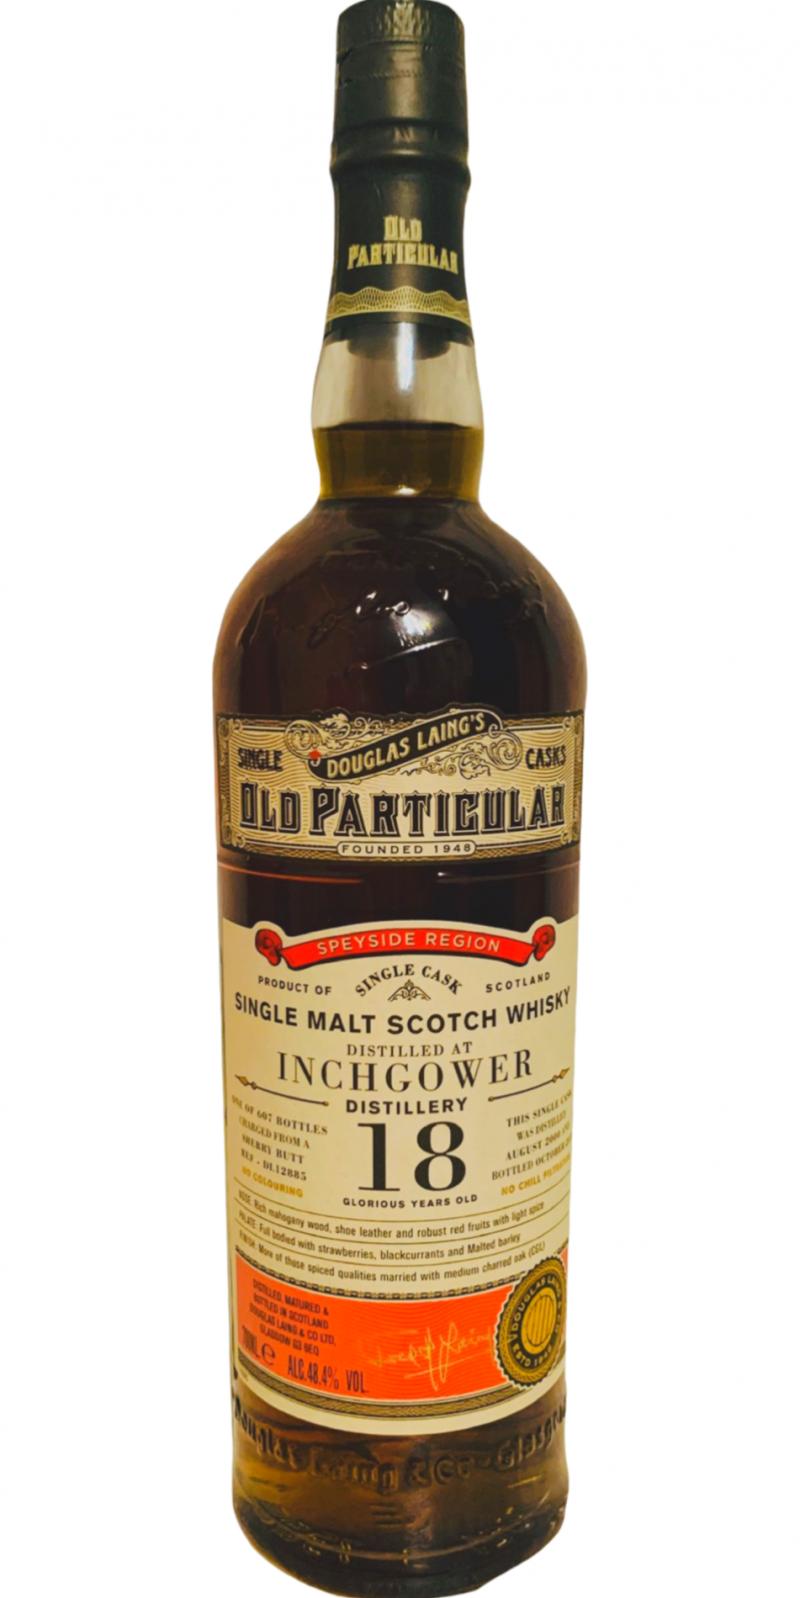 Inchgower 2000 DL Old Particular Sherry Butt 48.4% 700ml